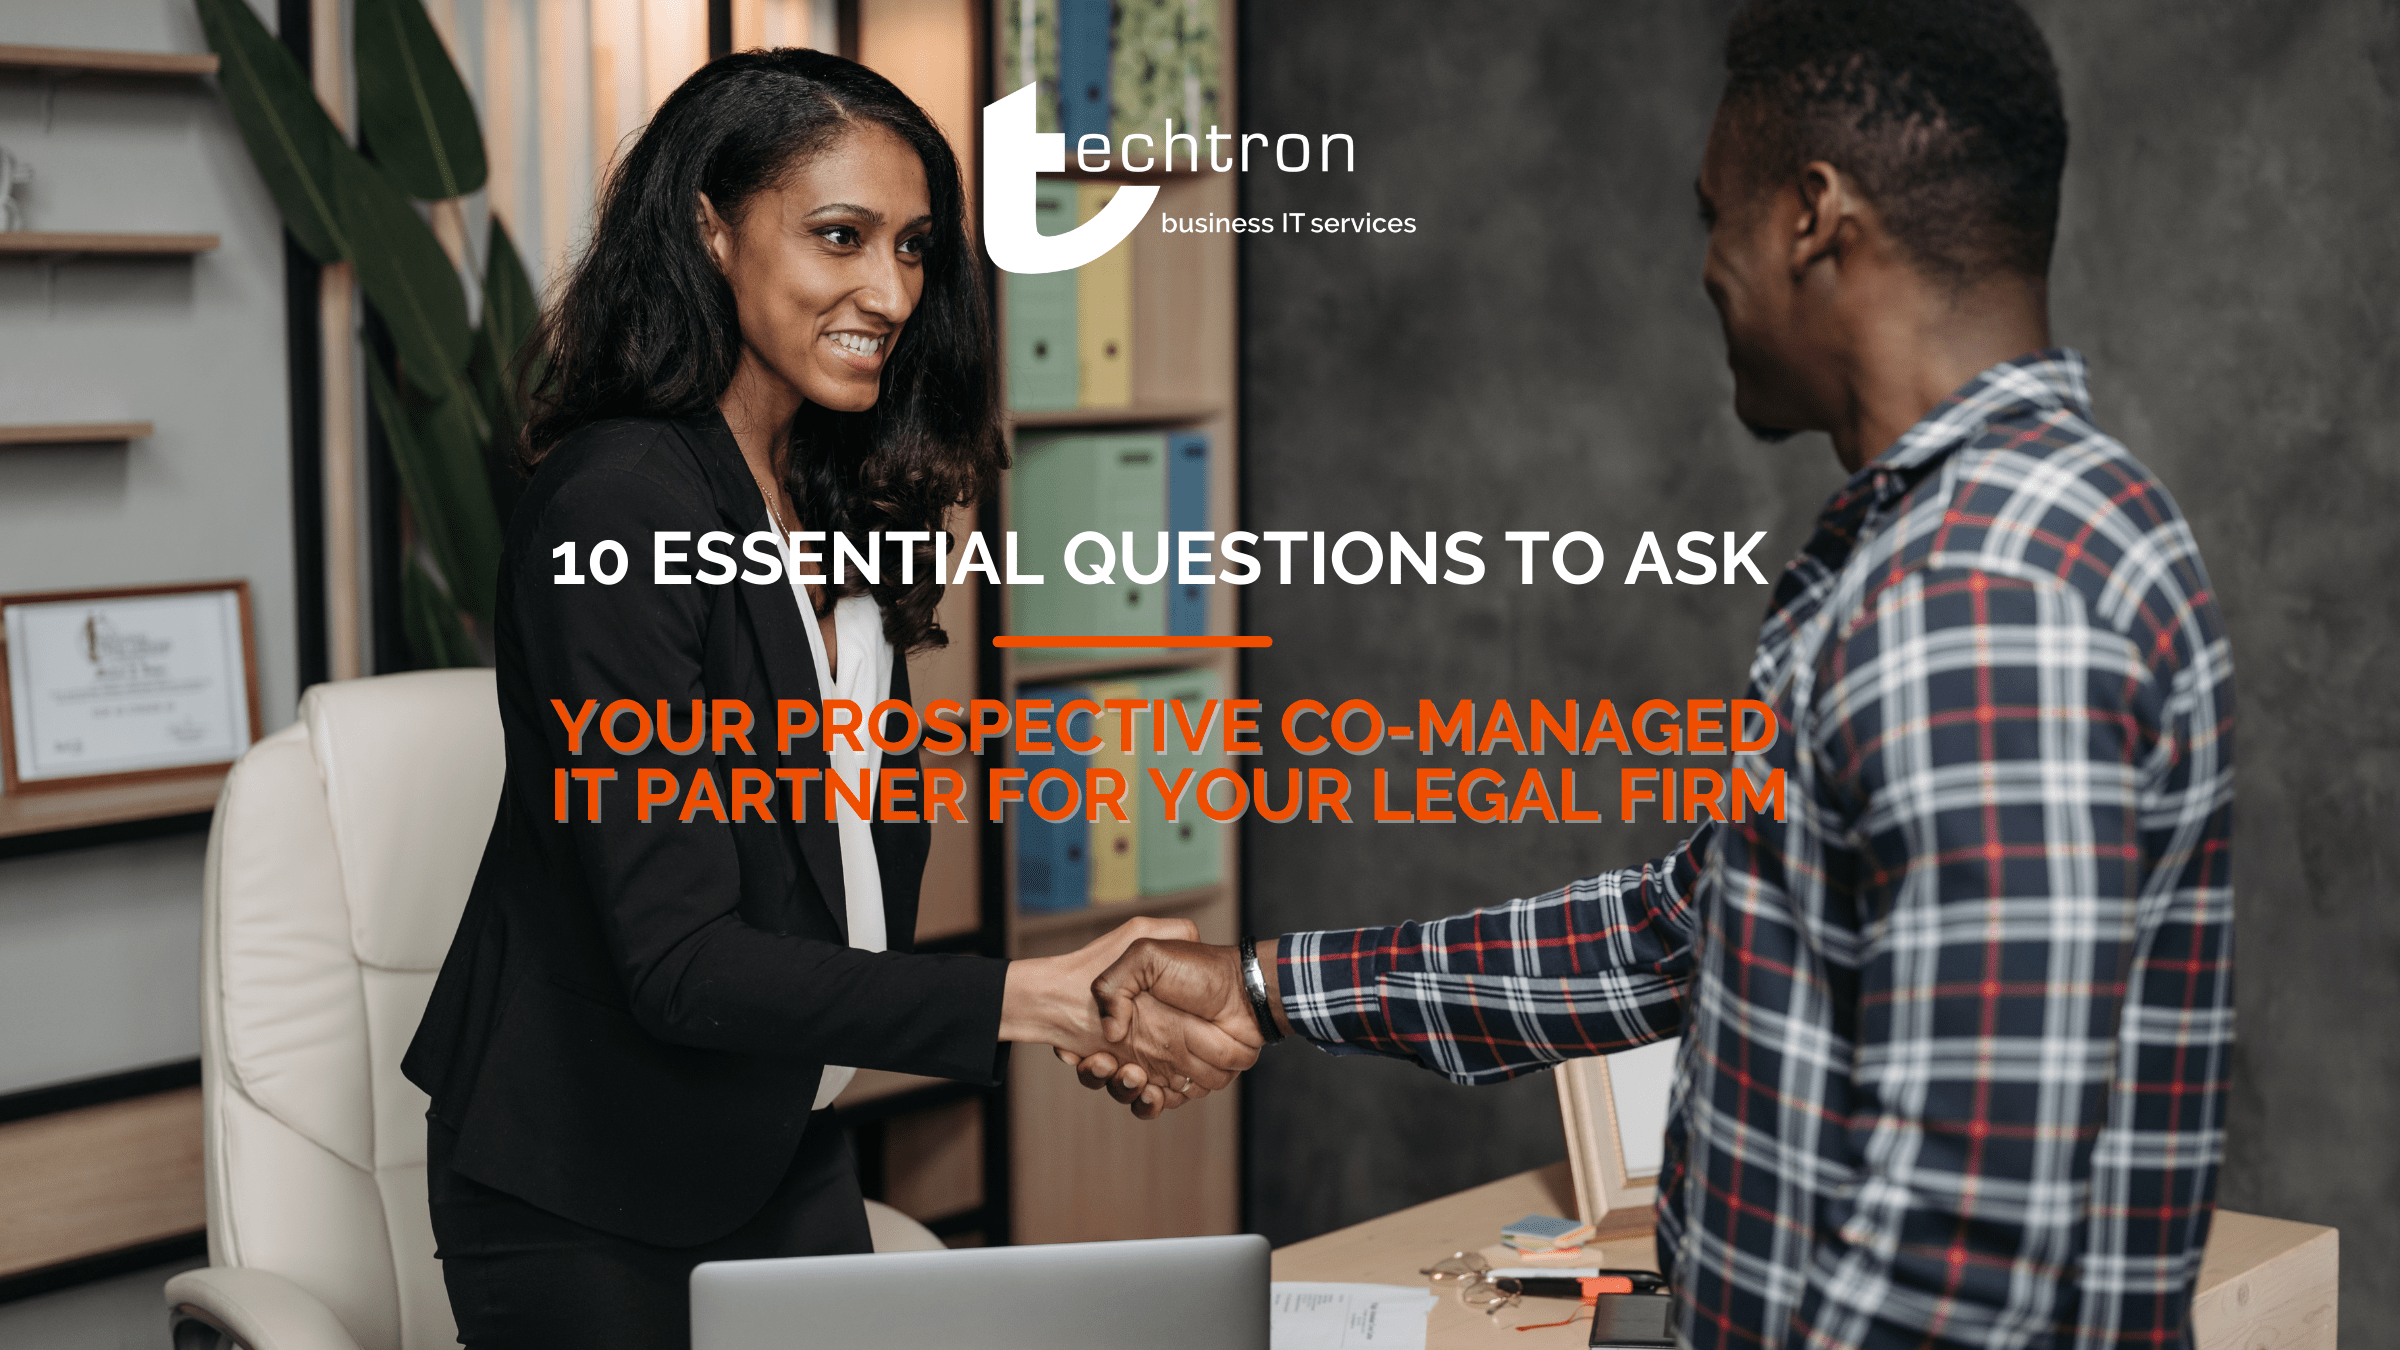 10 Essential questions to ask your prospective co-managed IT partner or legal firm.